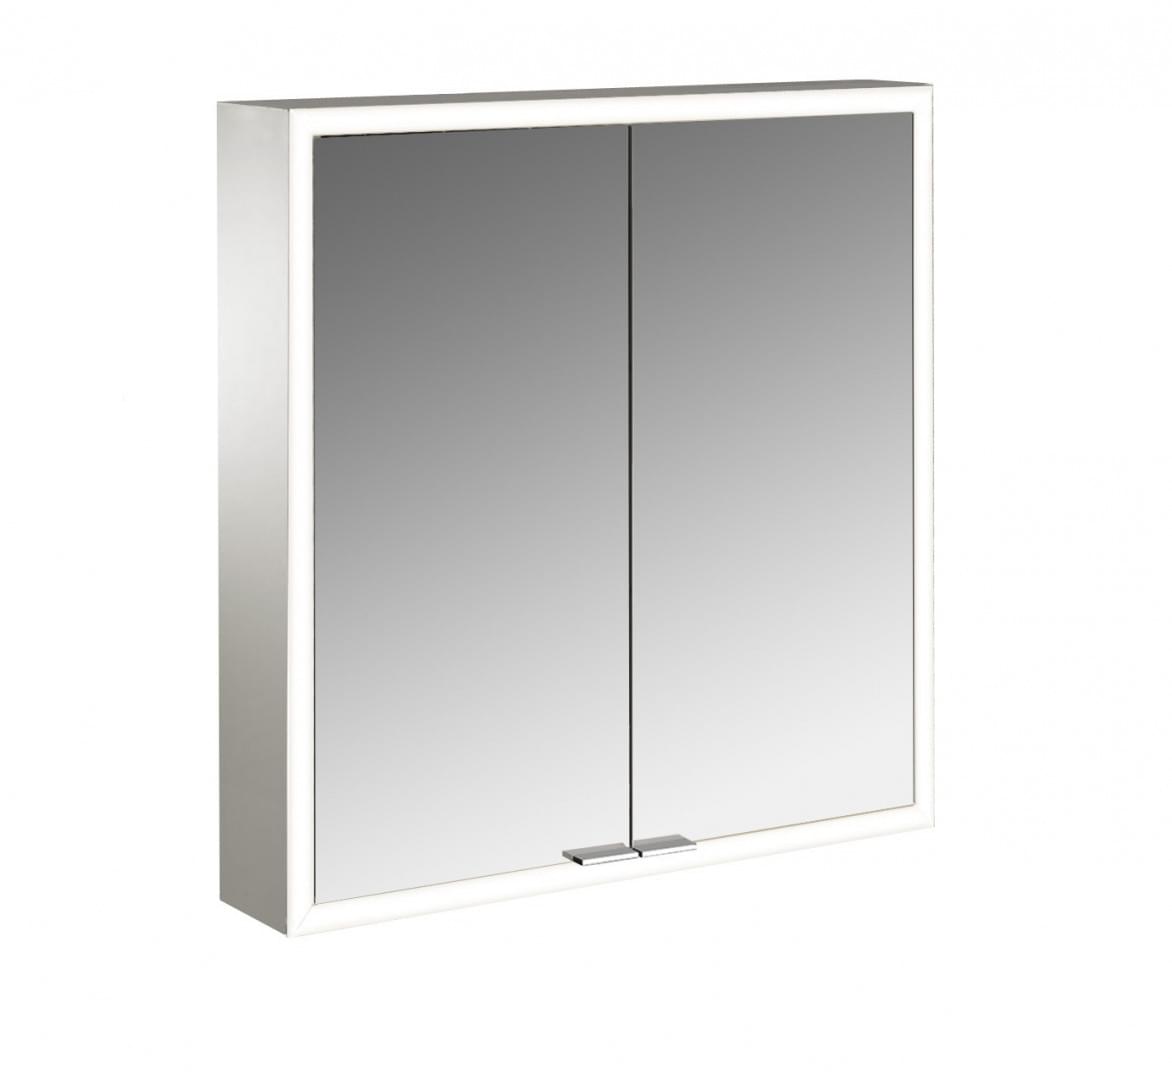 Mirror cabinet with light package, 600 mm, 2 doors, wall-mounted, IP20 from Emco